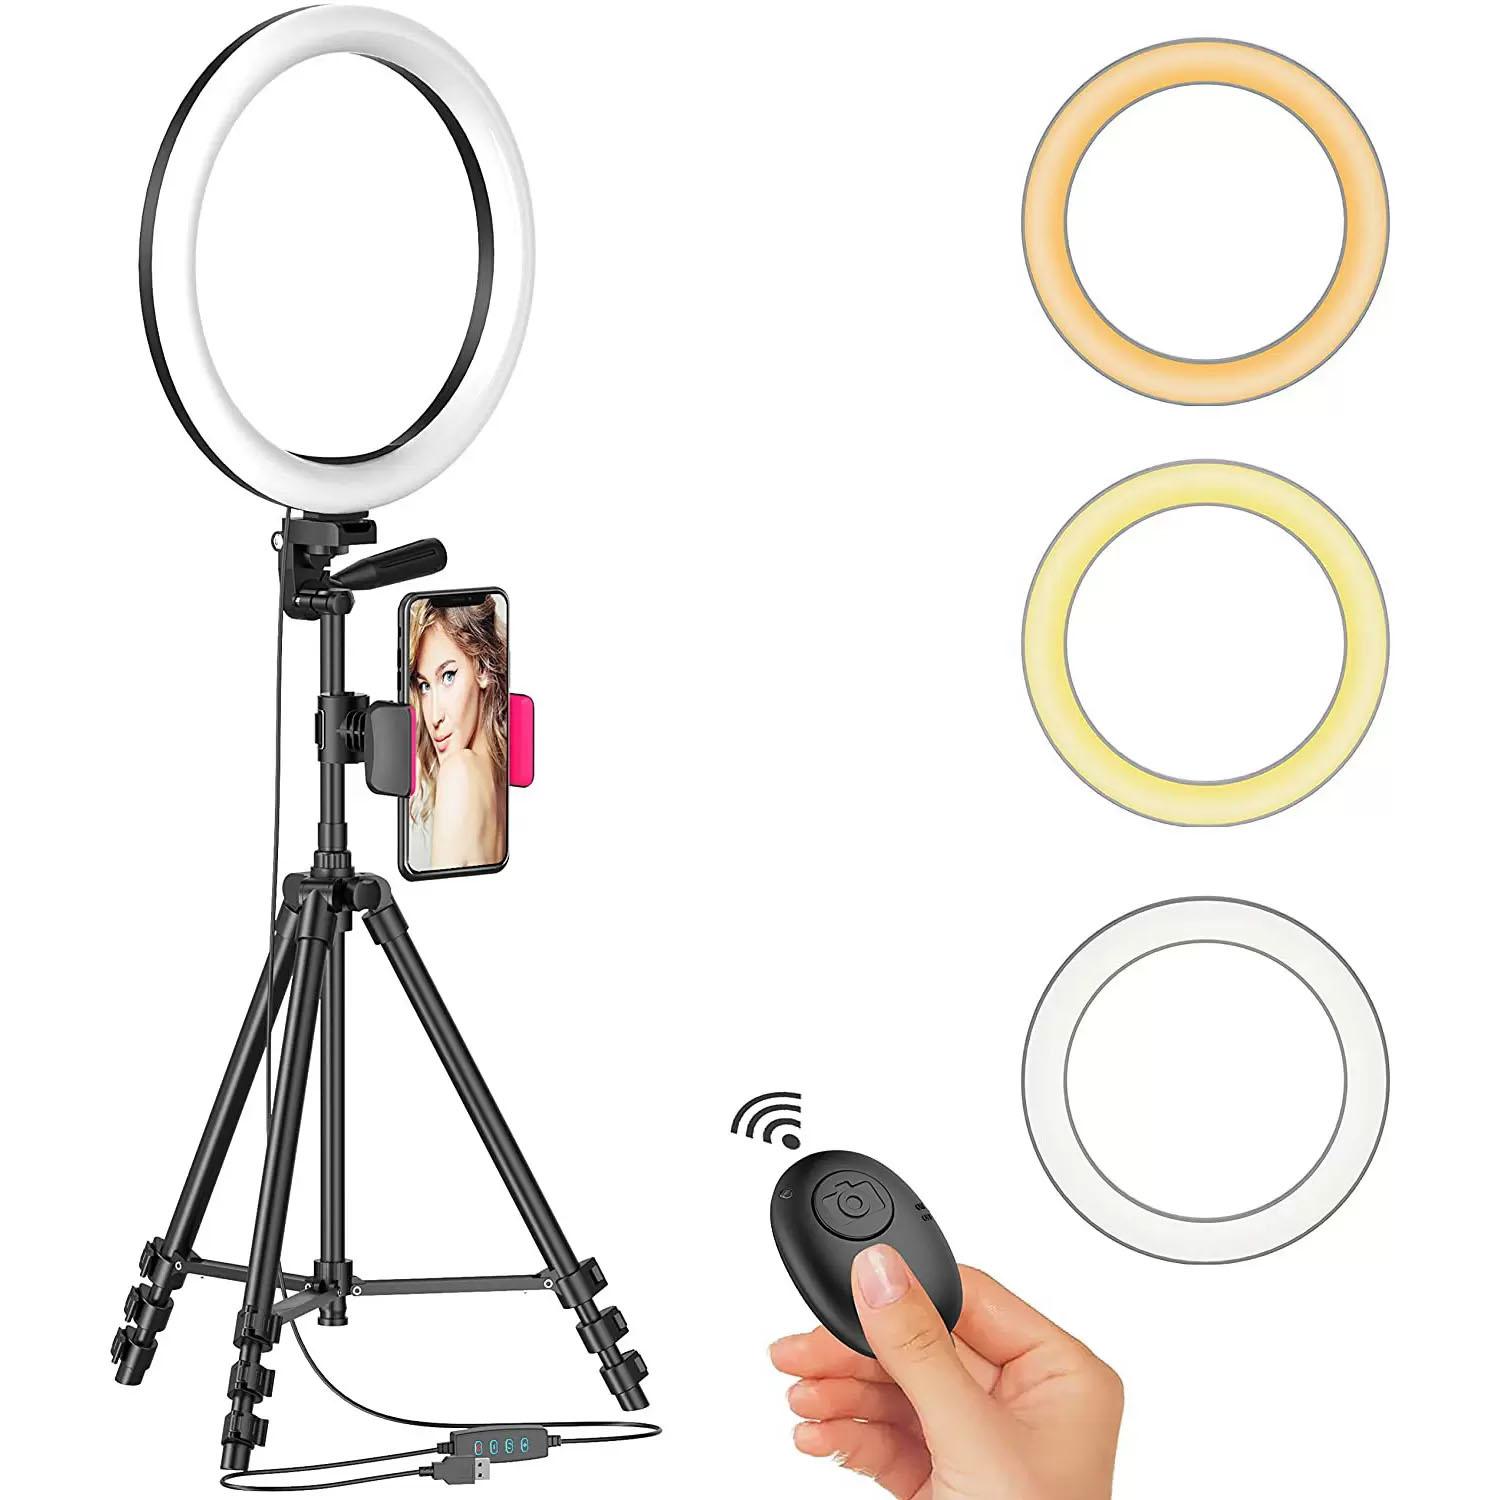 Aptoyu 12in LED Selfie Beauty Ring Light with Tripod for $21.99 Shipped